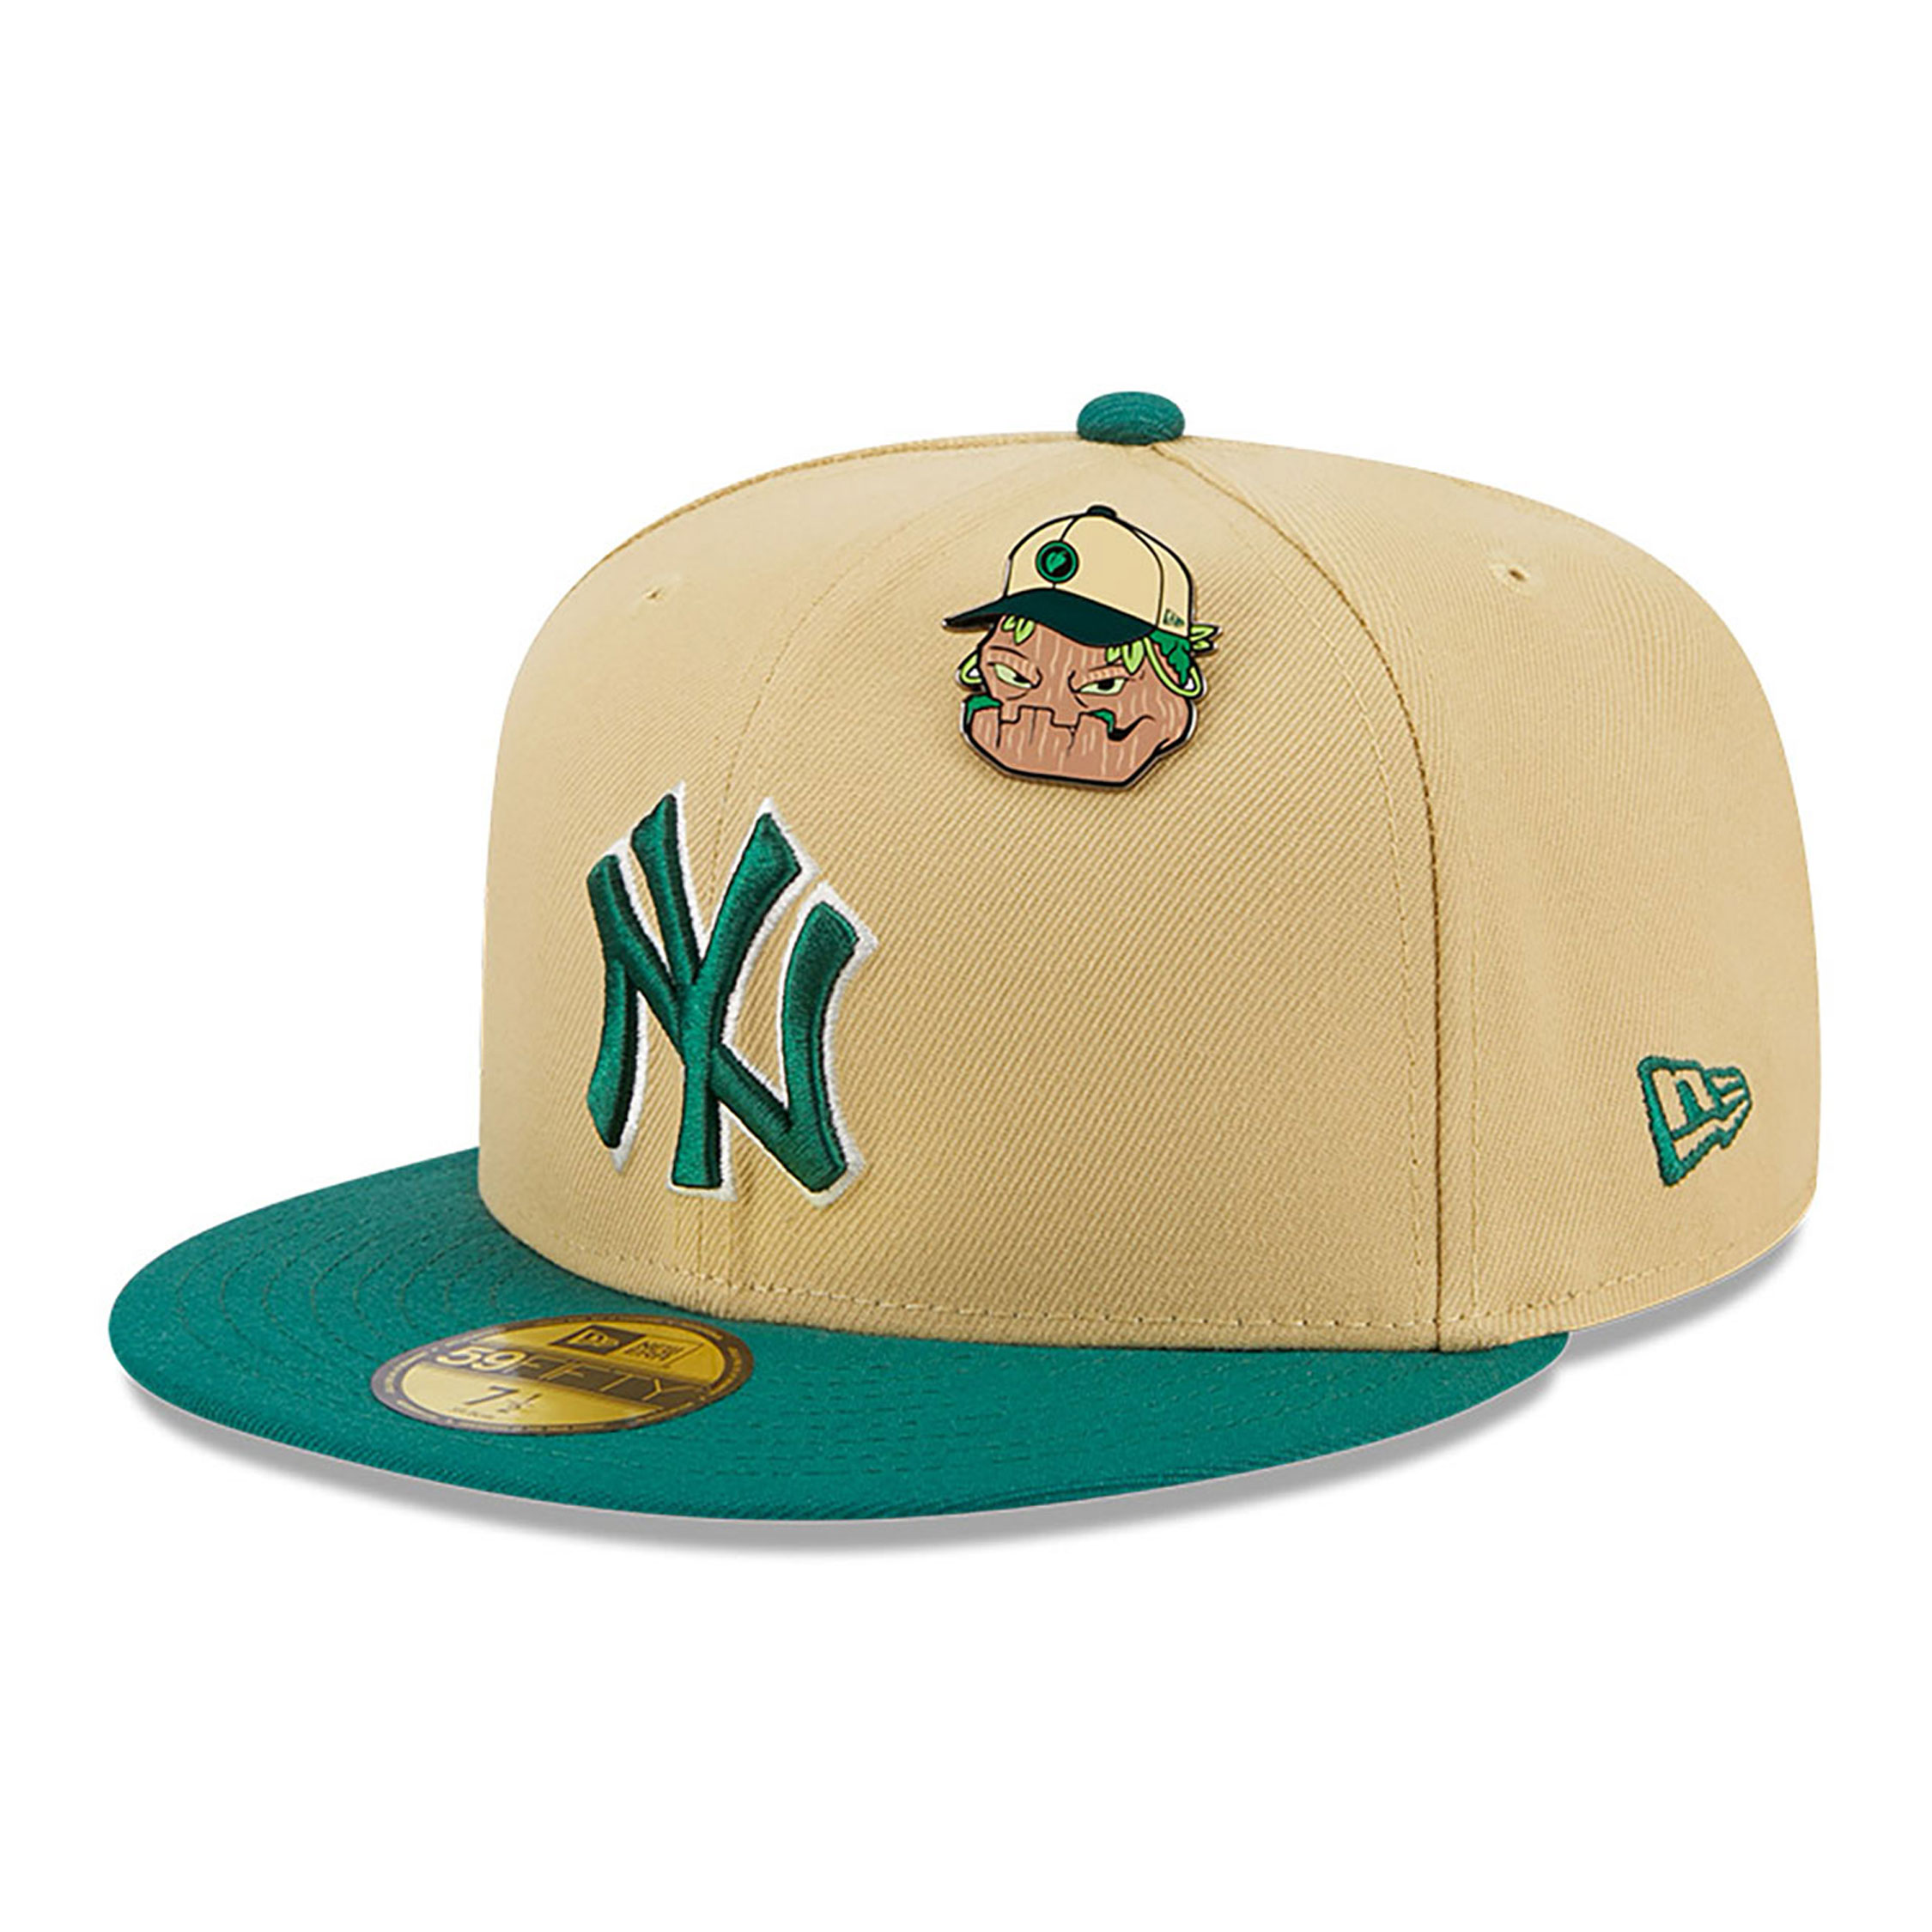 The Elements New York Yankees 59FIFTY Fitted Cap